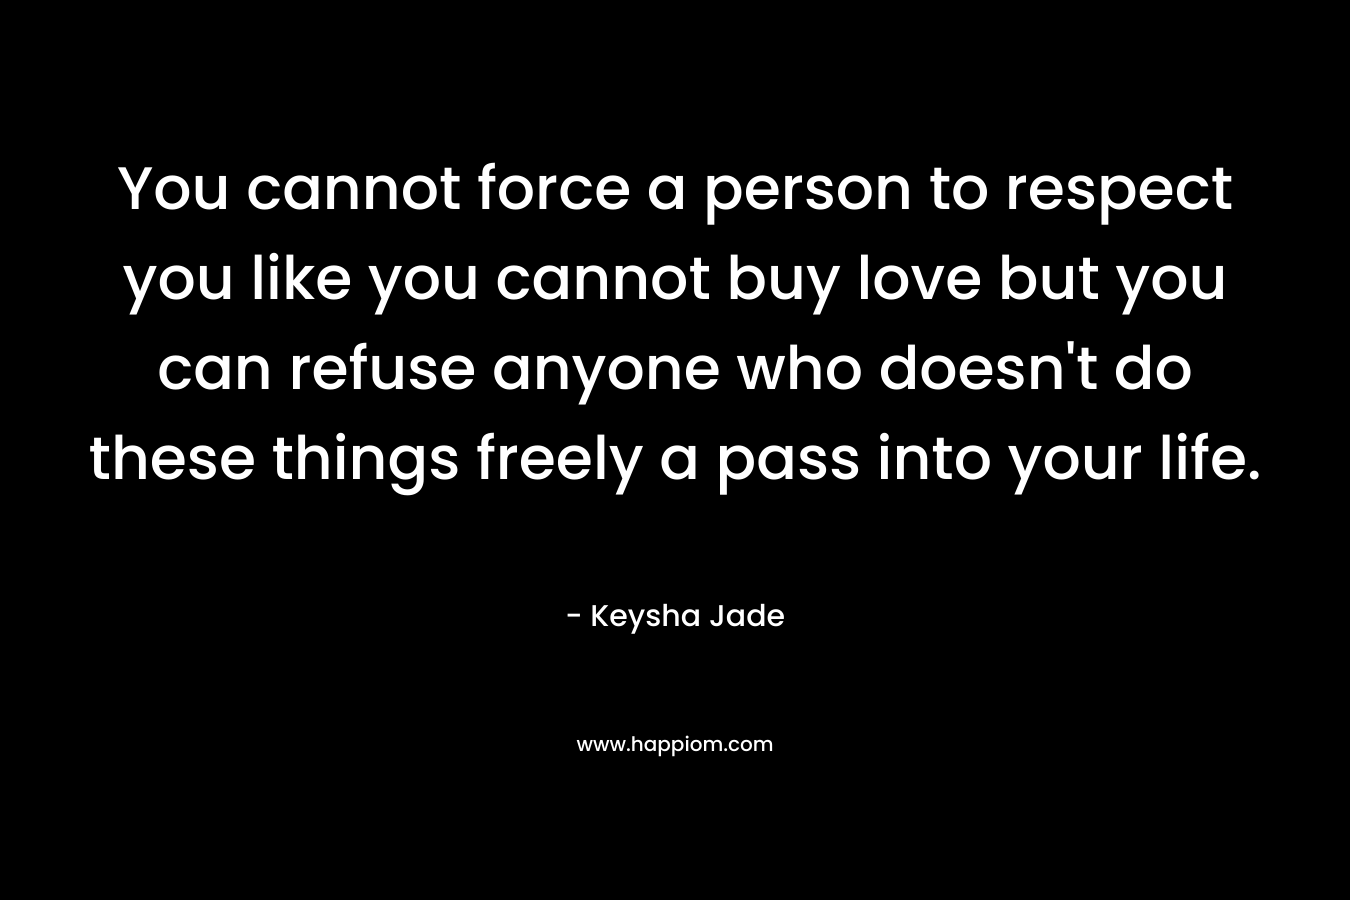 You cannot force a person to respect you like you cannot buy love but you can refuse anyone who doesn't do these things freely a pass into your life.